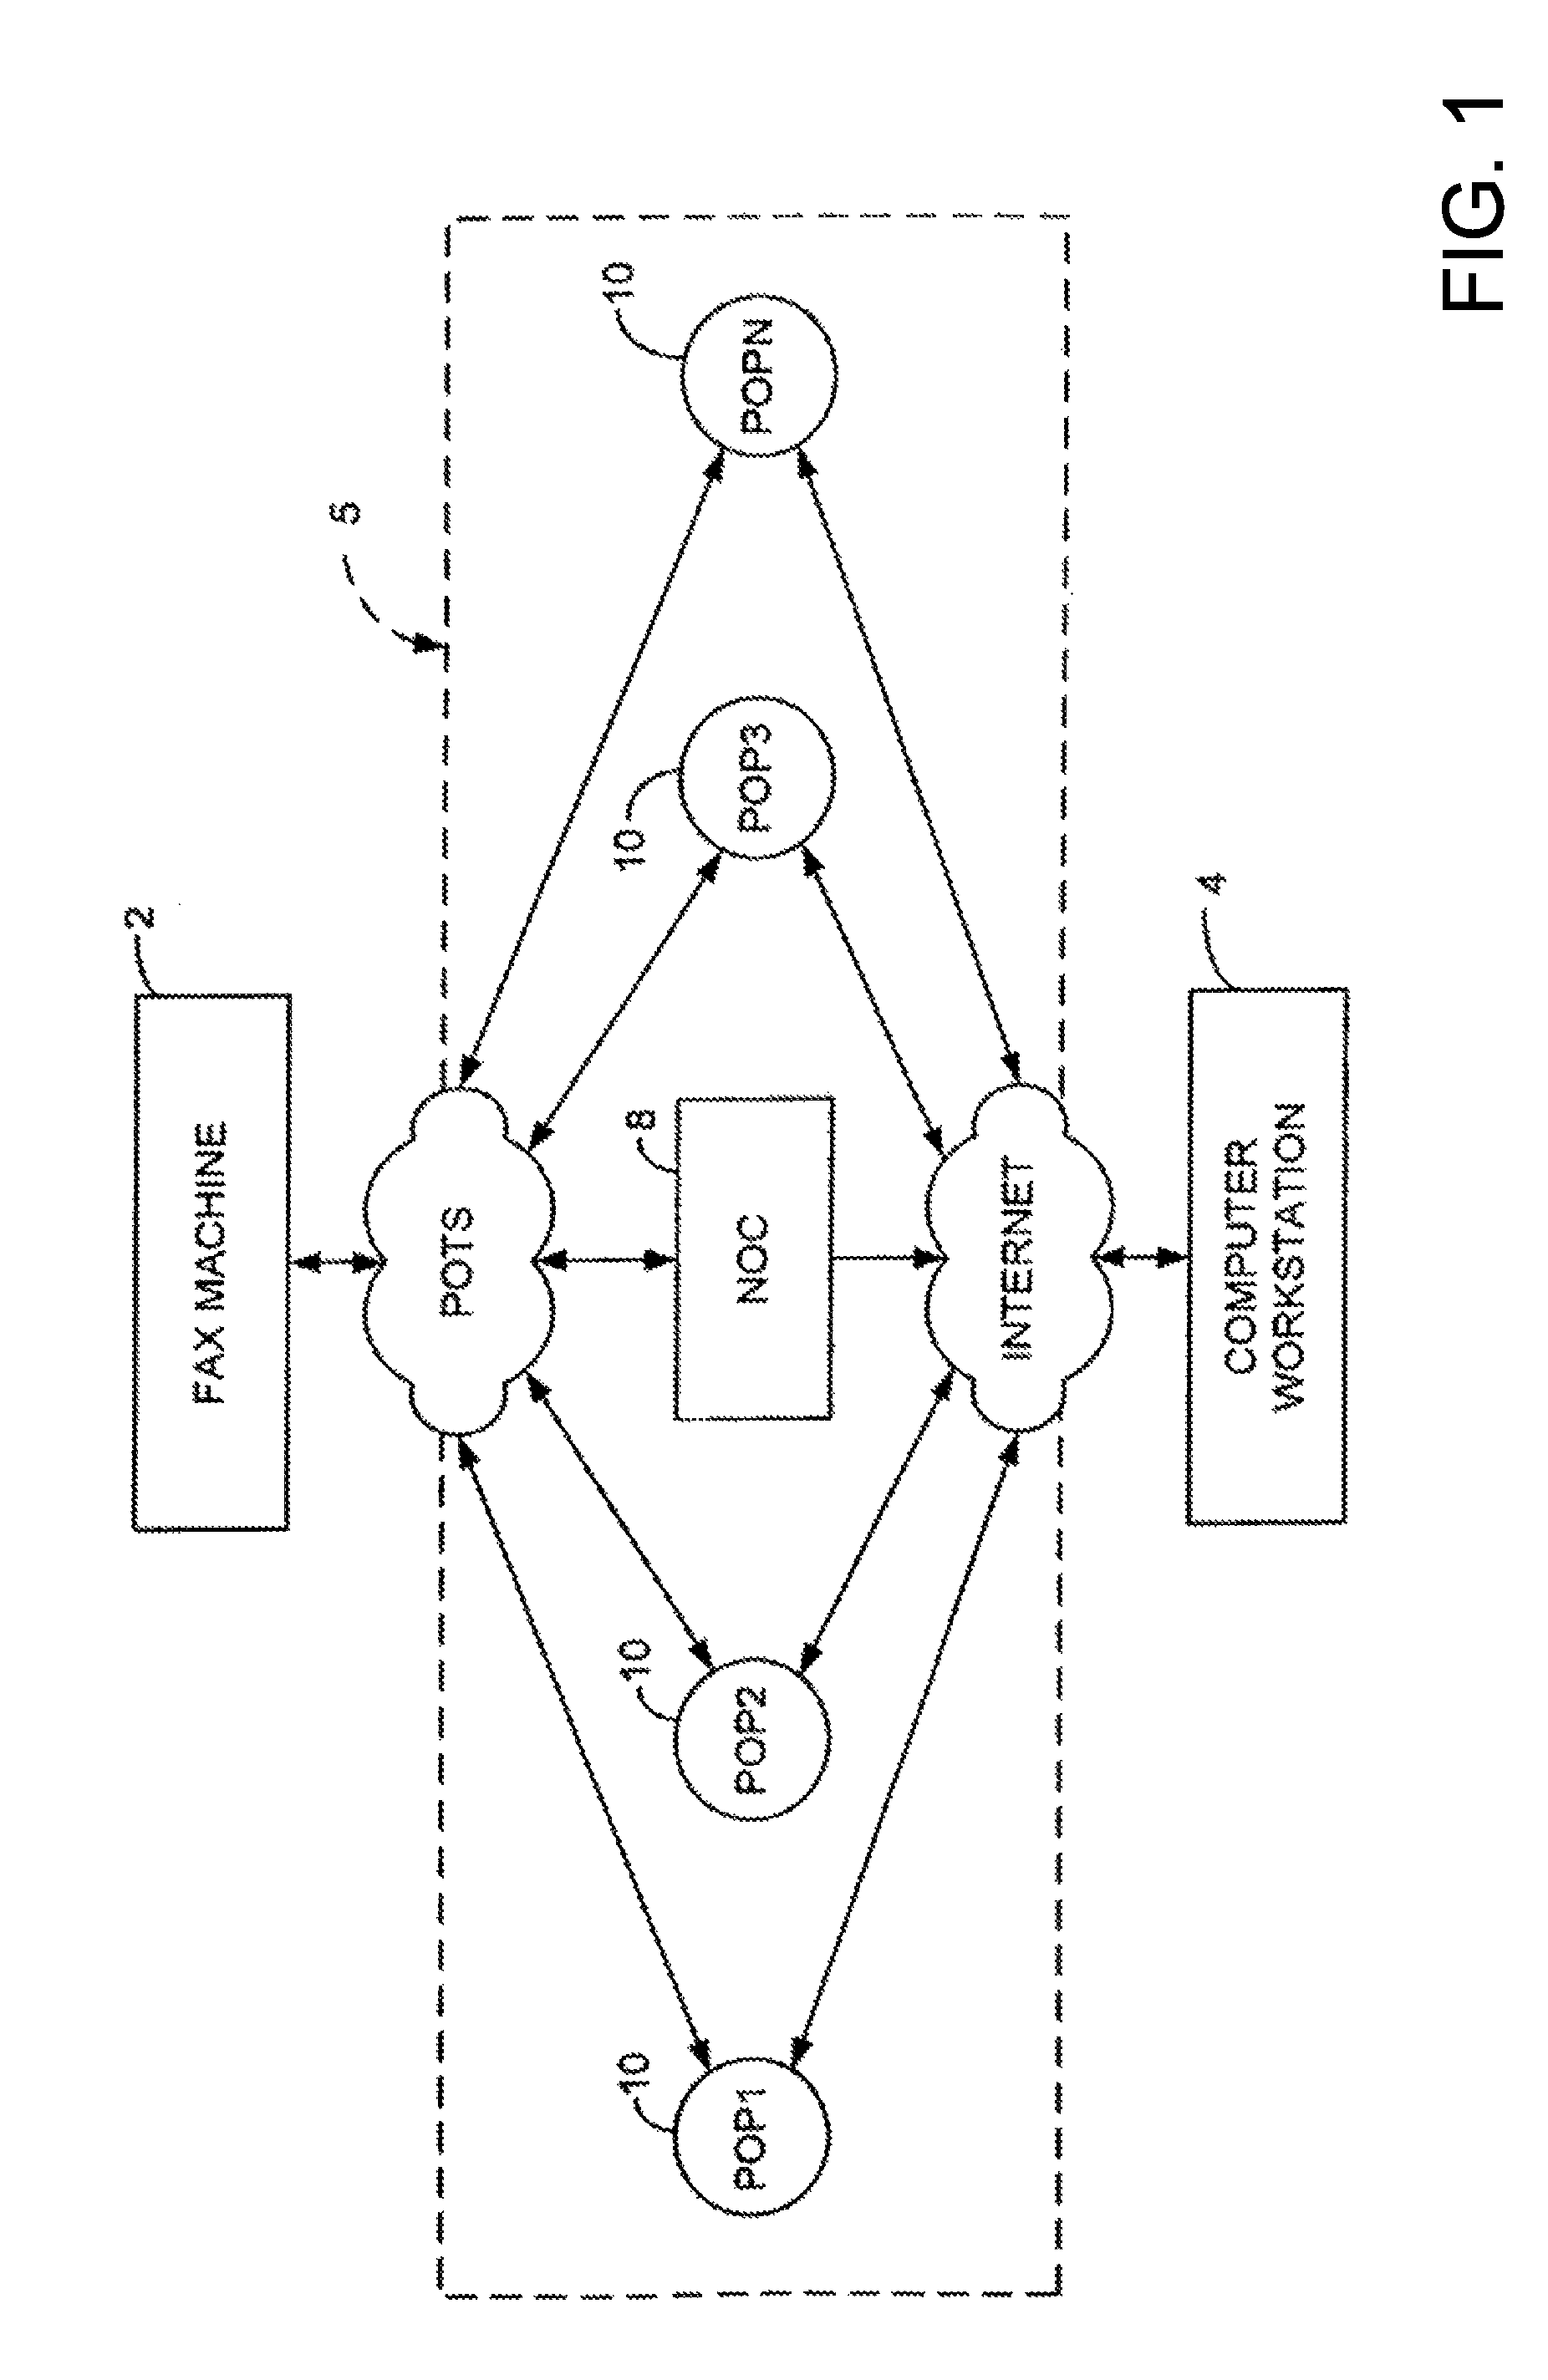 Methods and apparatus for facsimile transmissions to electronic storage destinations including tracking data